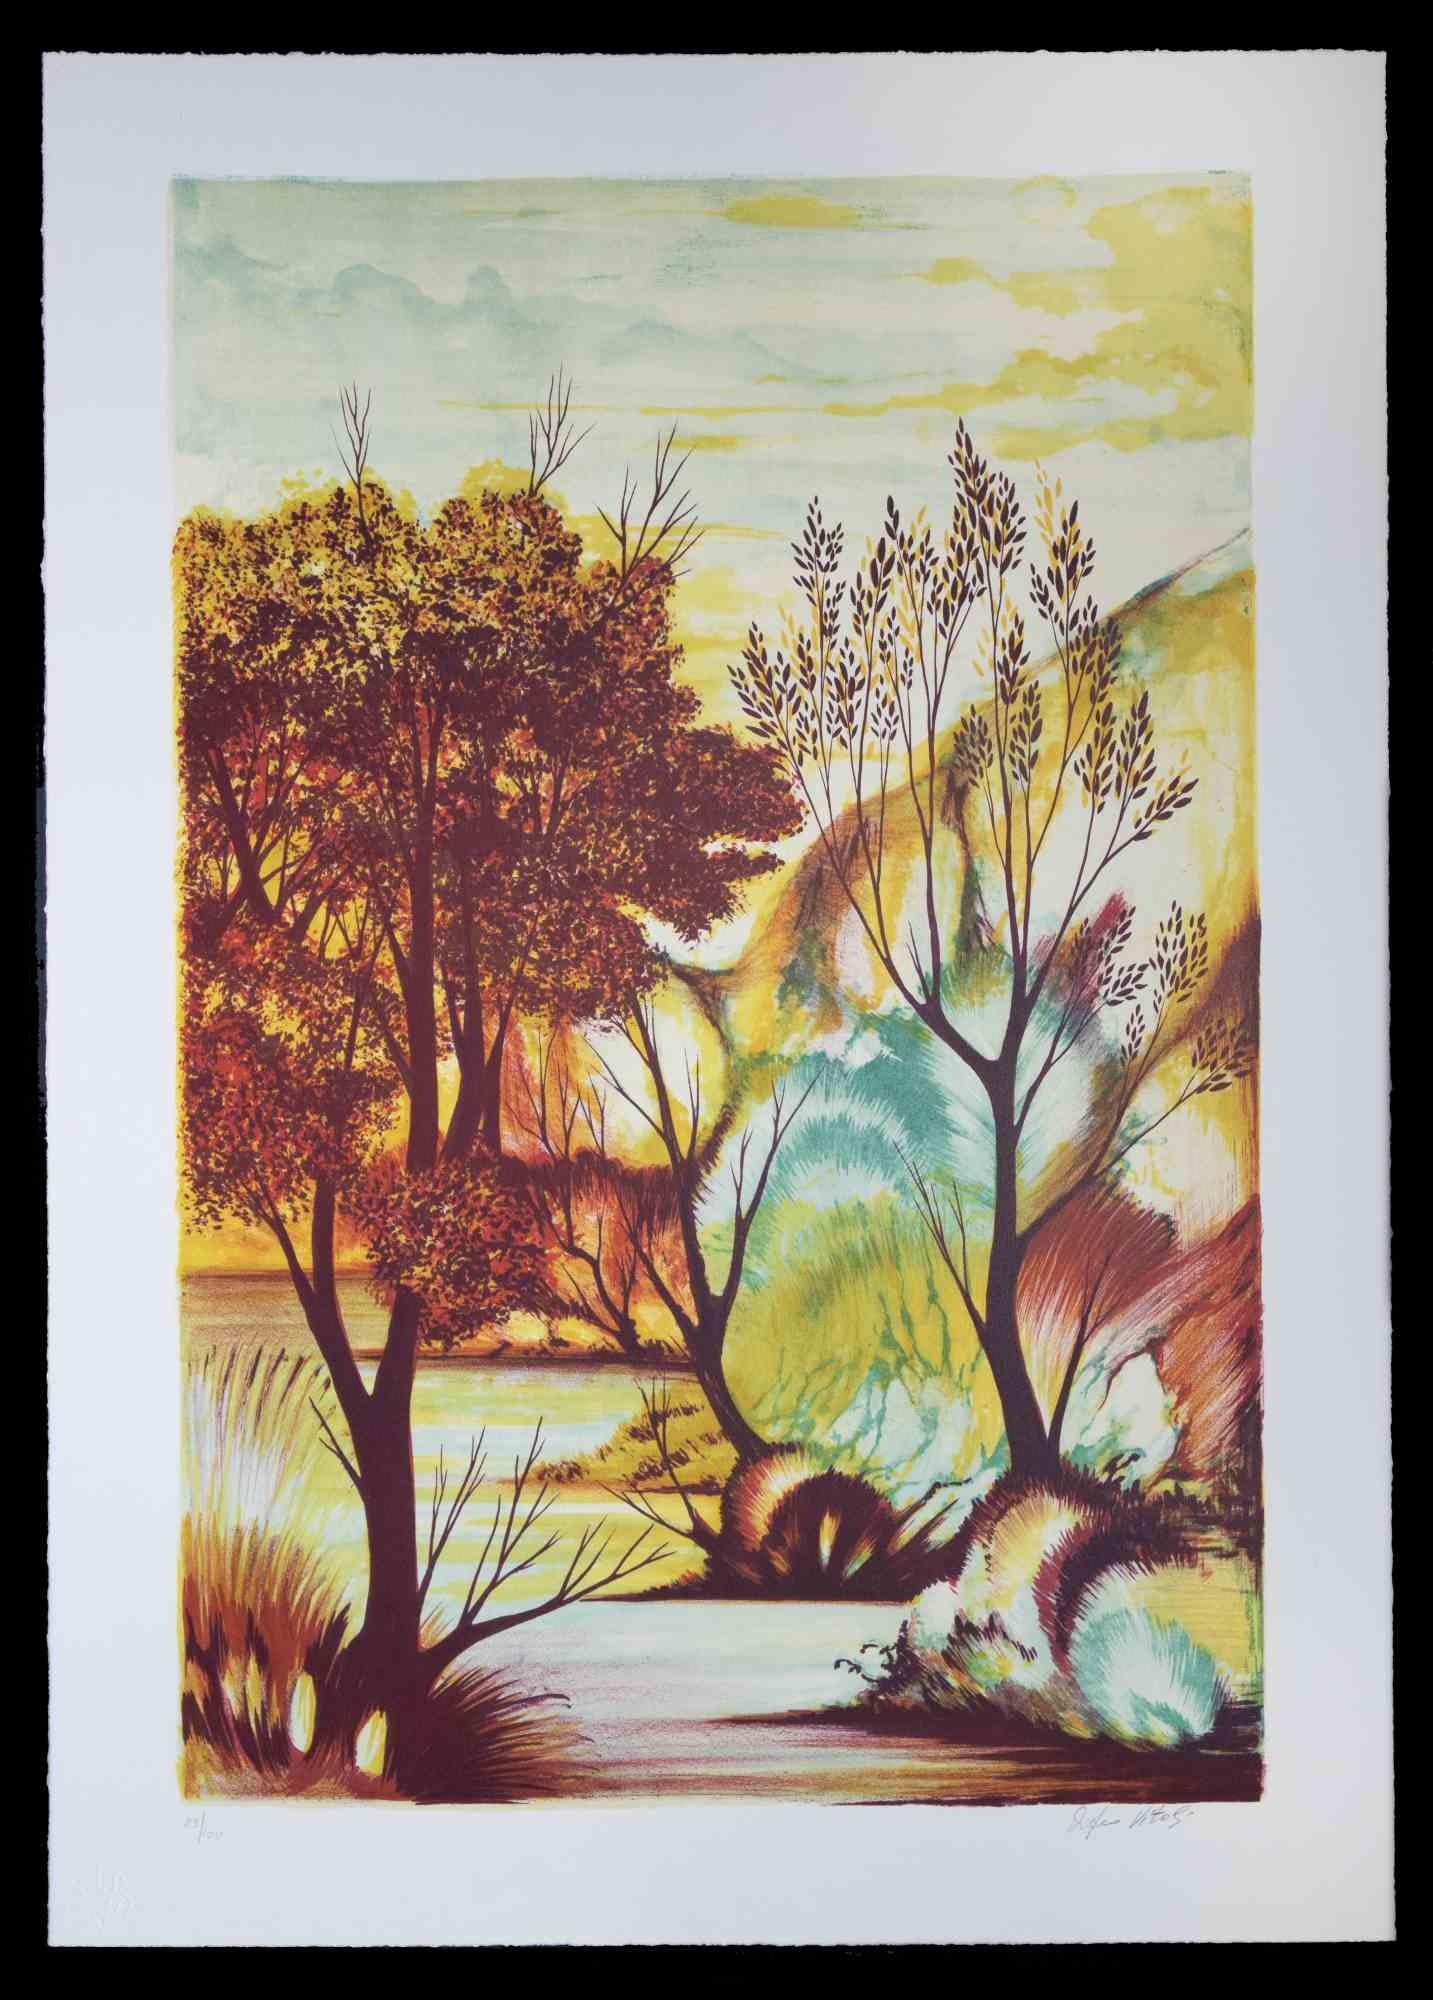 Autumn  - Original Etching by Orfeo Vitali  - 1970s